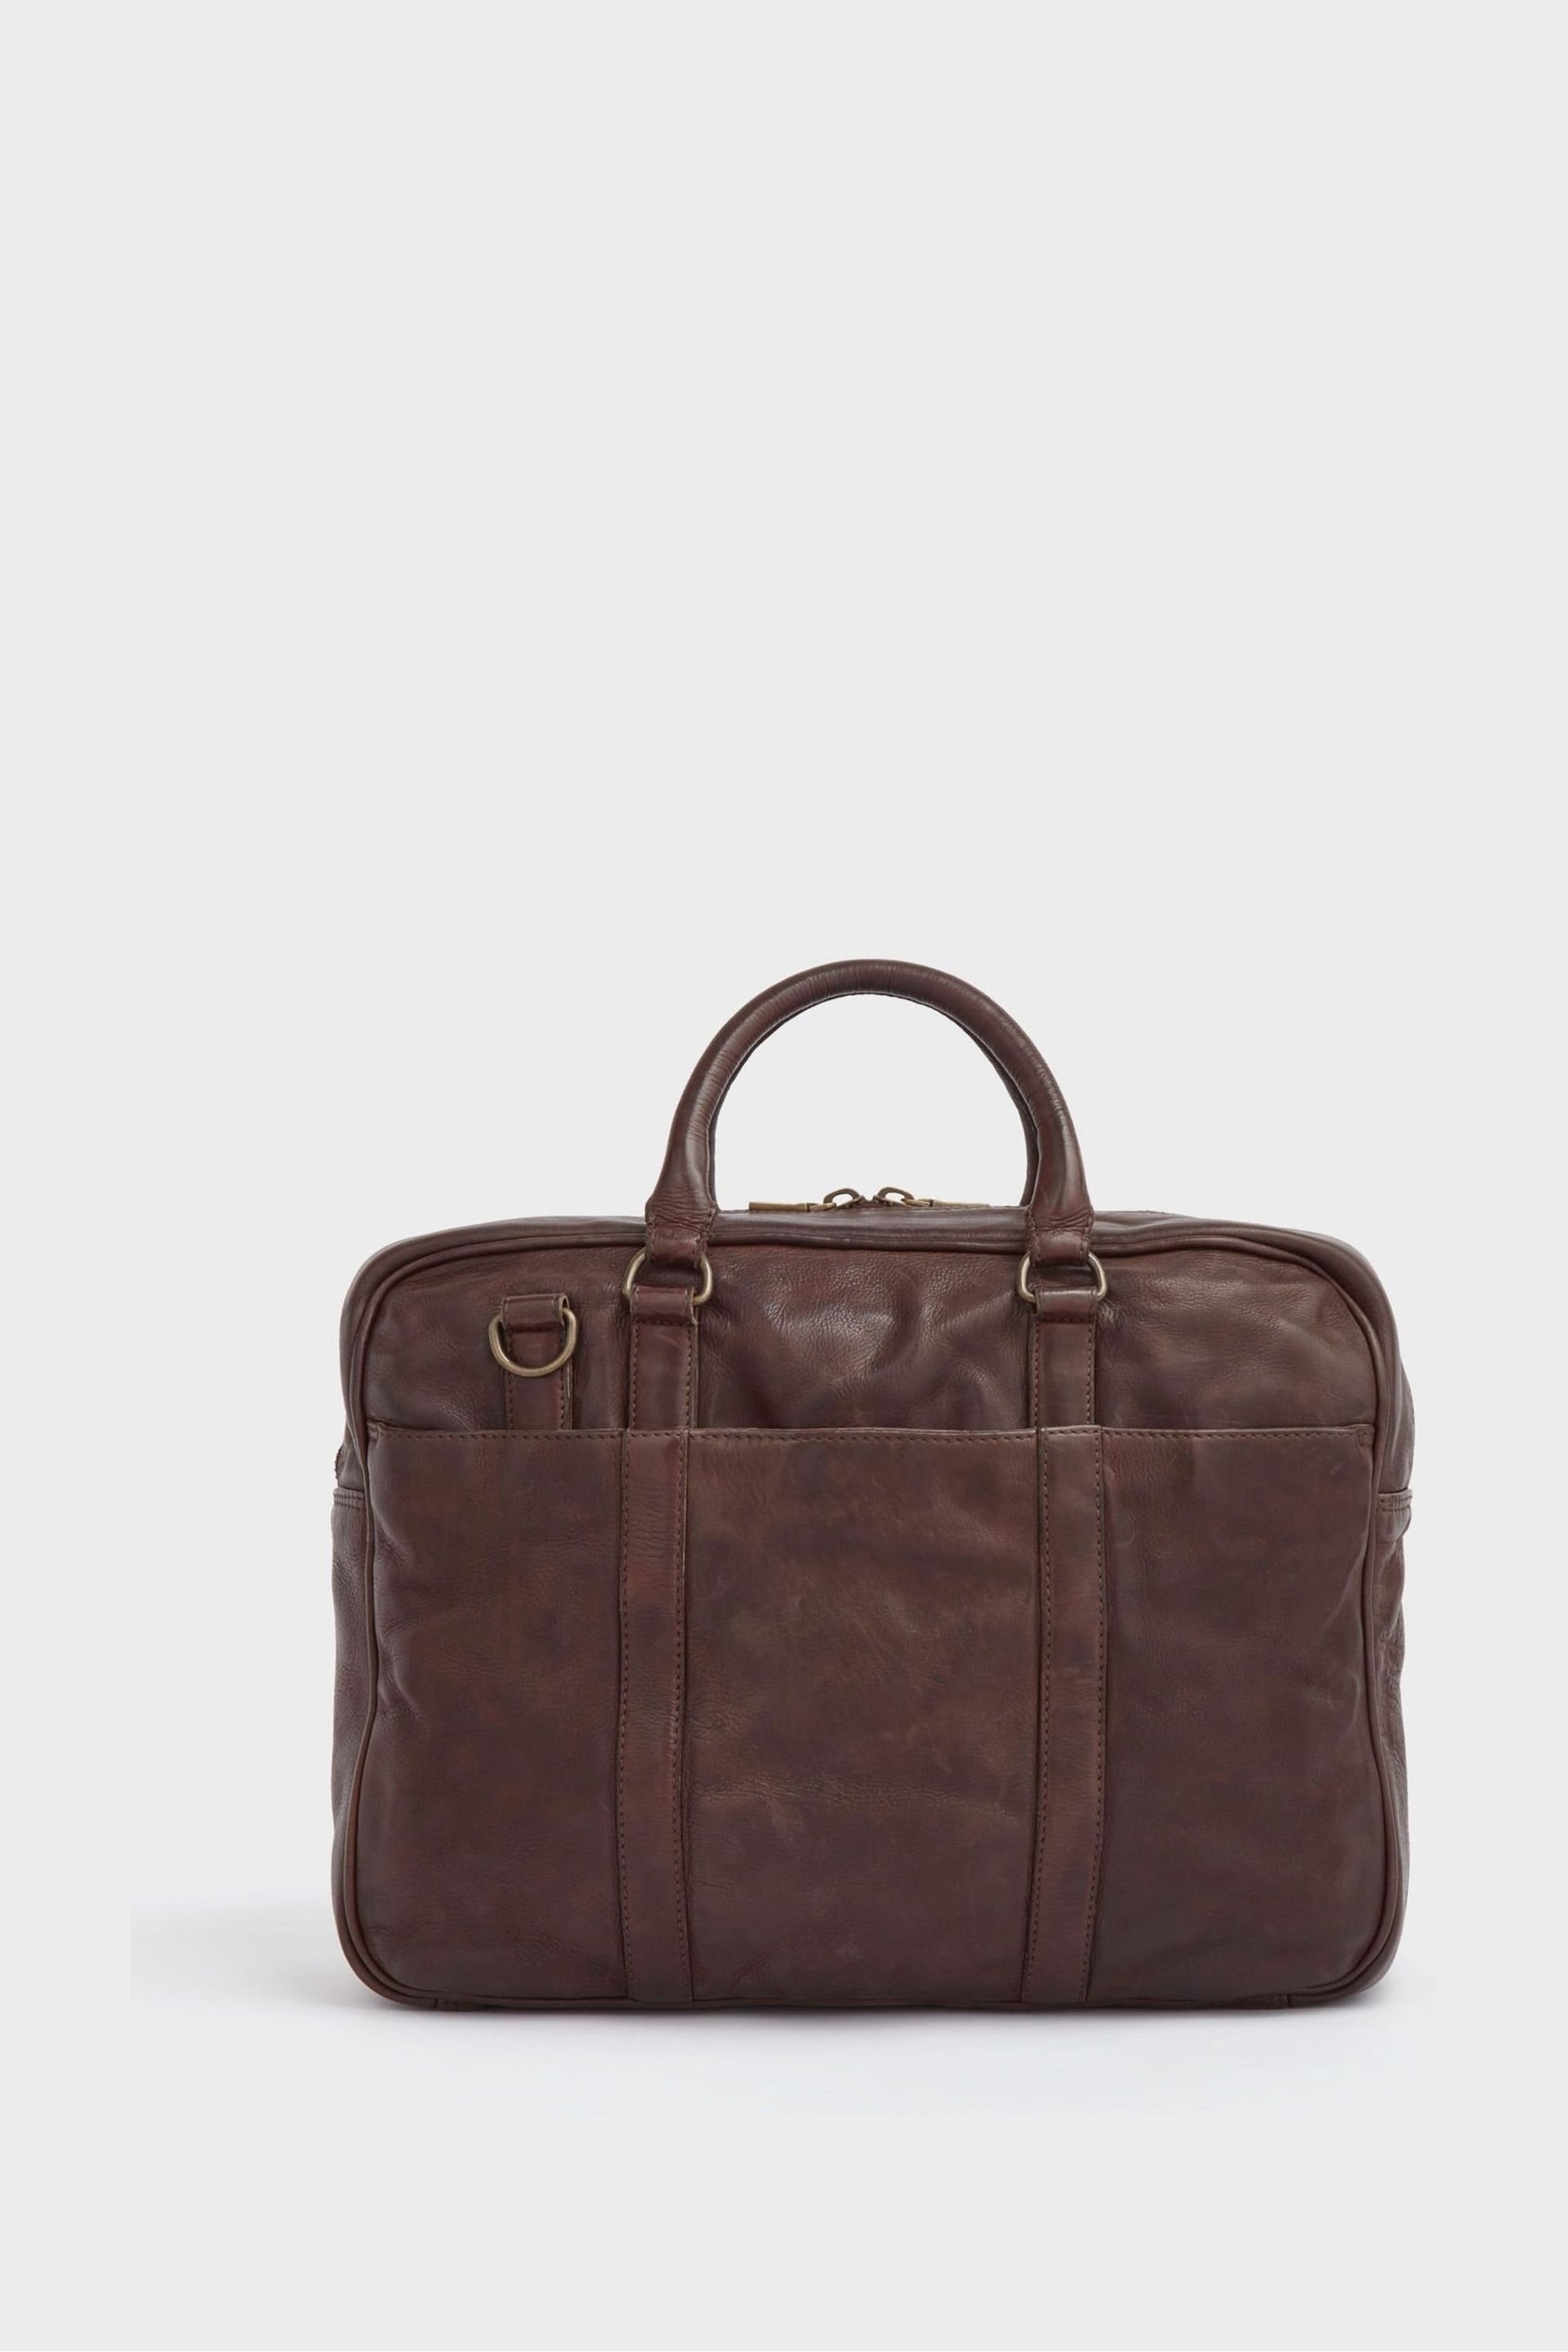 Osprey London Medium The Washed Leather Grip Brown Bag - Image 2 of 7